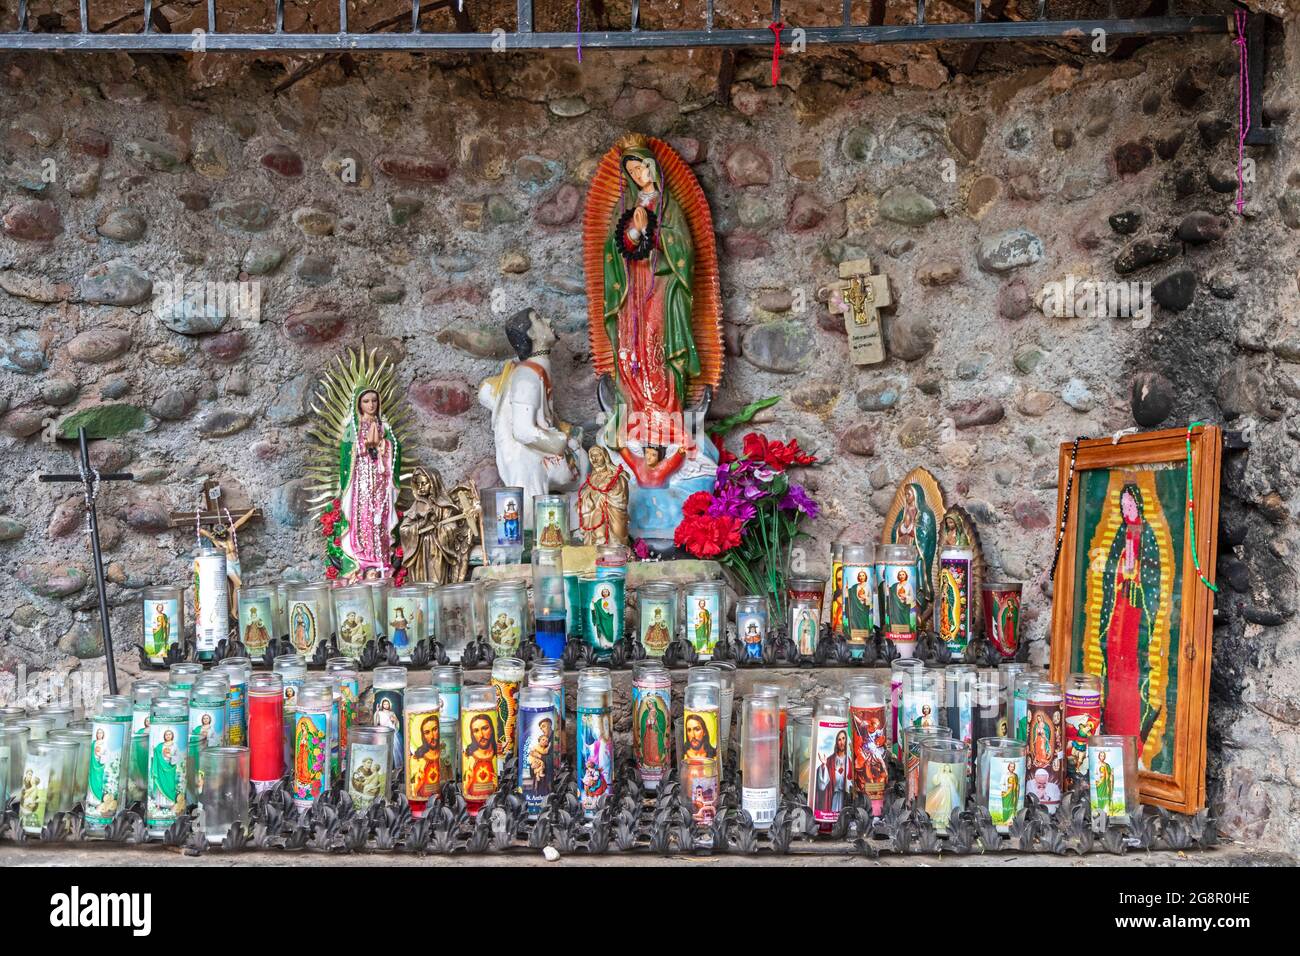 Chimayo, New Mexico - Prayer candles at El Santuario de Chimayo, a Roman Catholic pilgrimage shrine in the mountains of northern New Mexico. Stock Photo